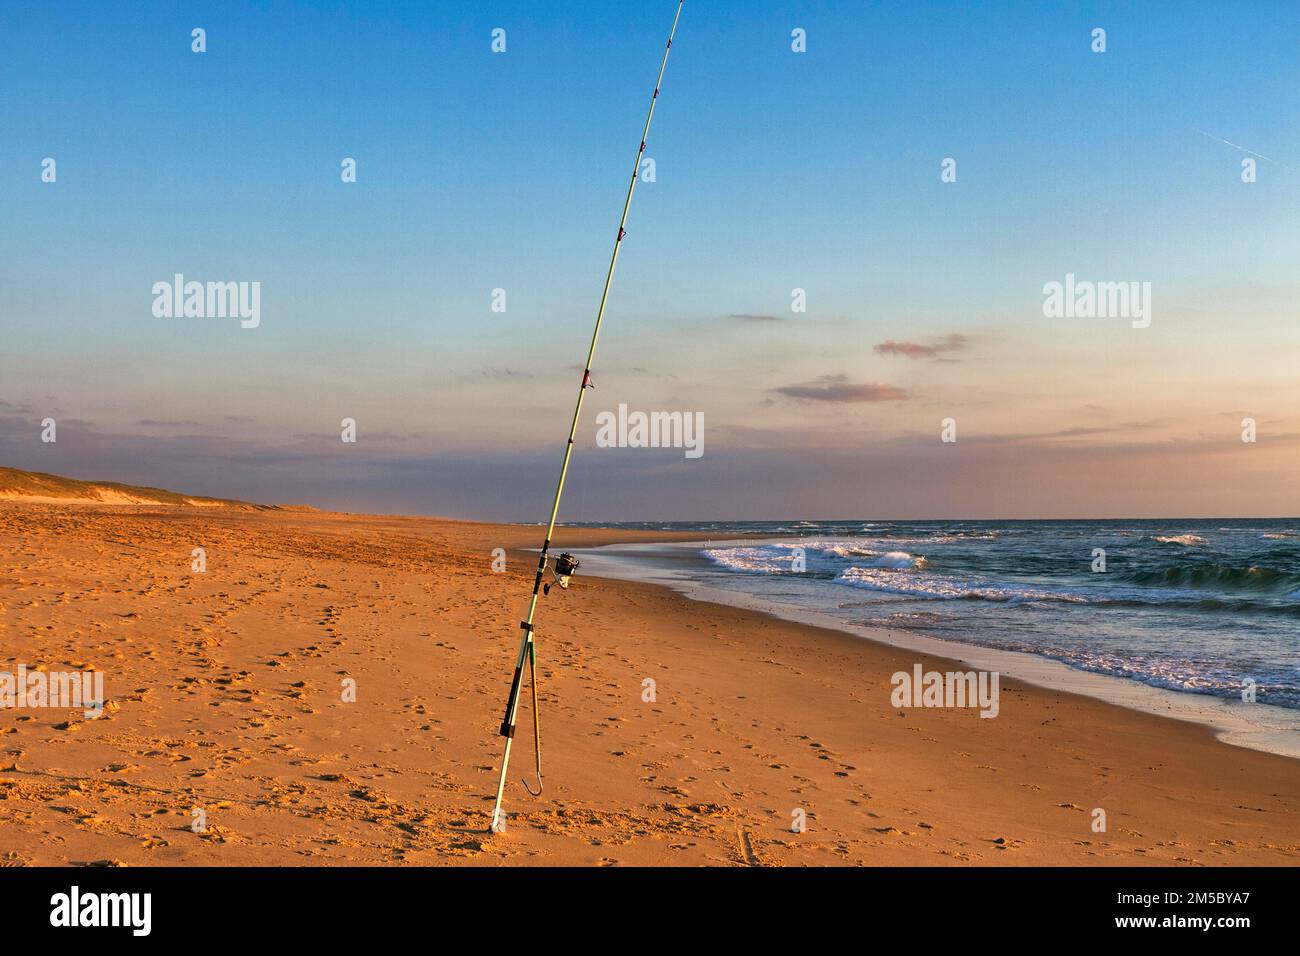 Surf fishing, fishing rod stands on the beach, Soustons Plage, evening light,  Silver Coast, Cote dArgent, Atlantic Ocean, Soustons, Landes Stock Photo -  Alamy